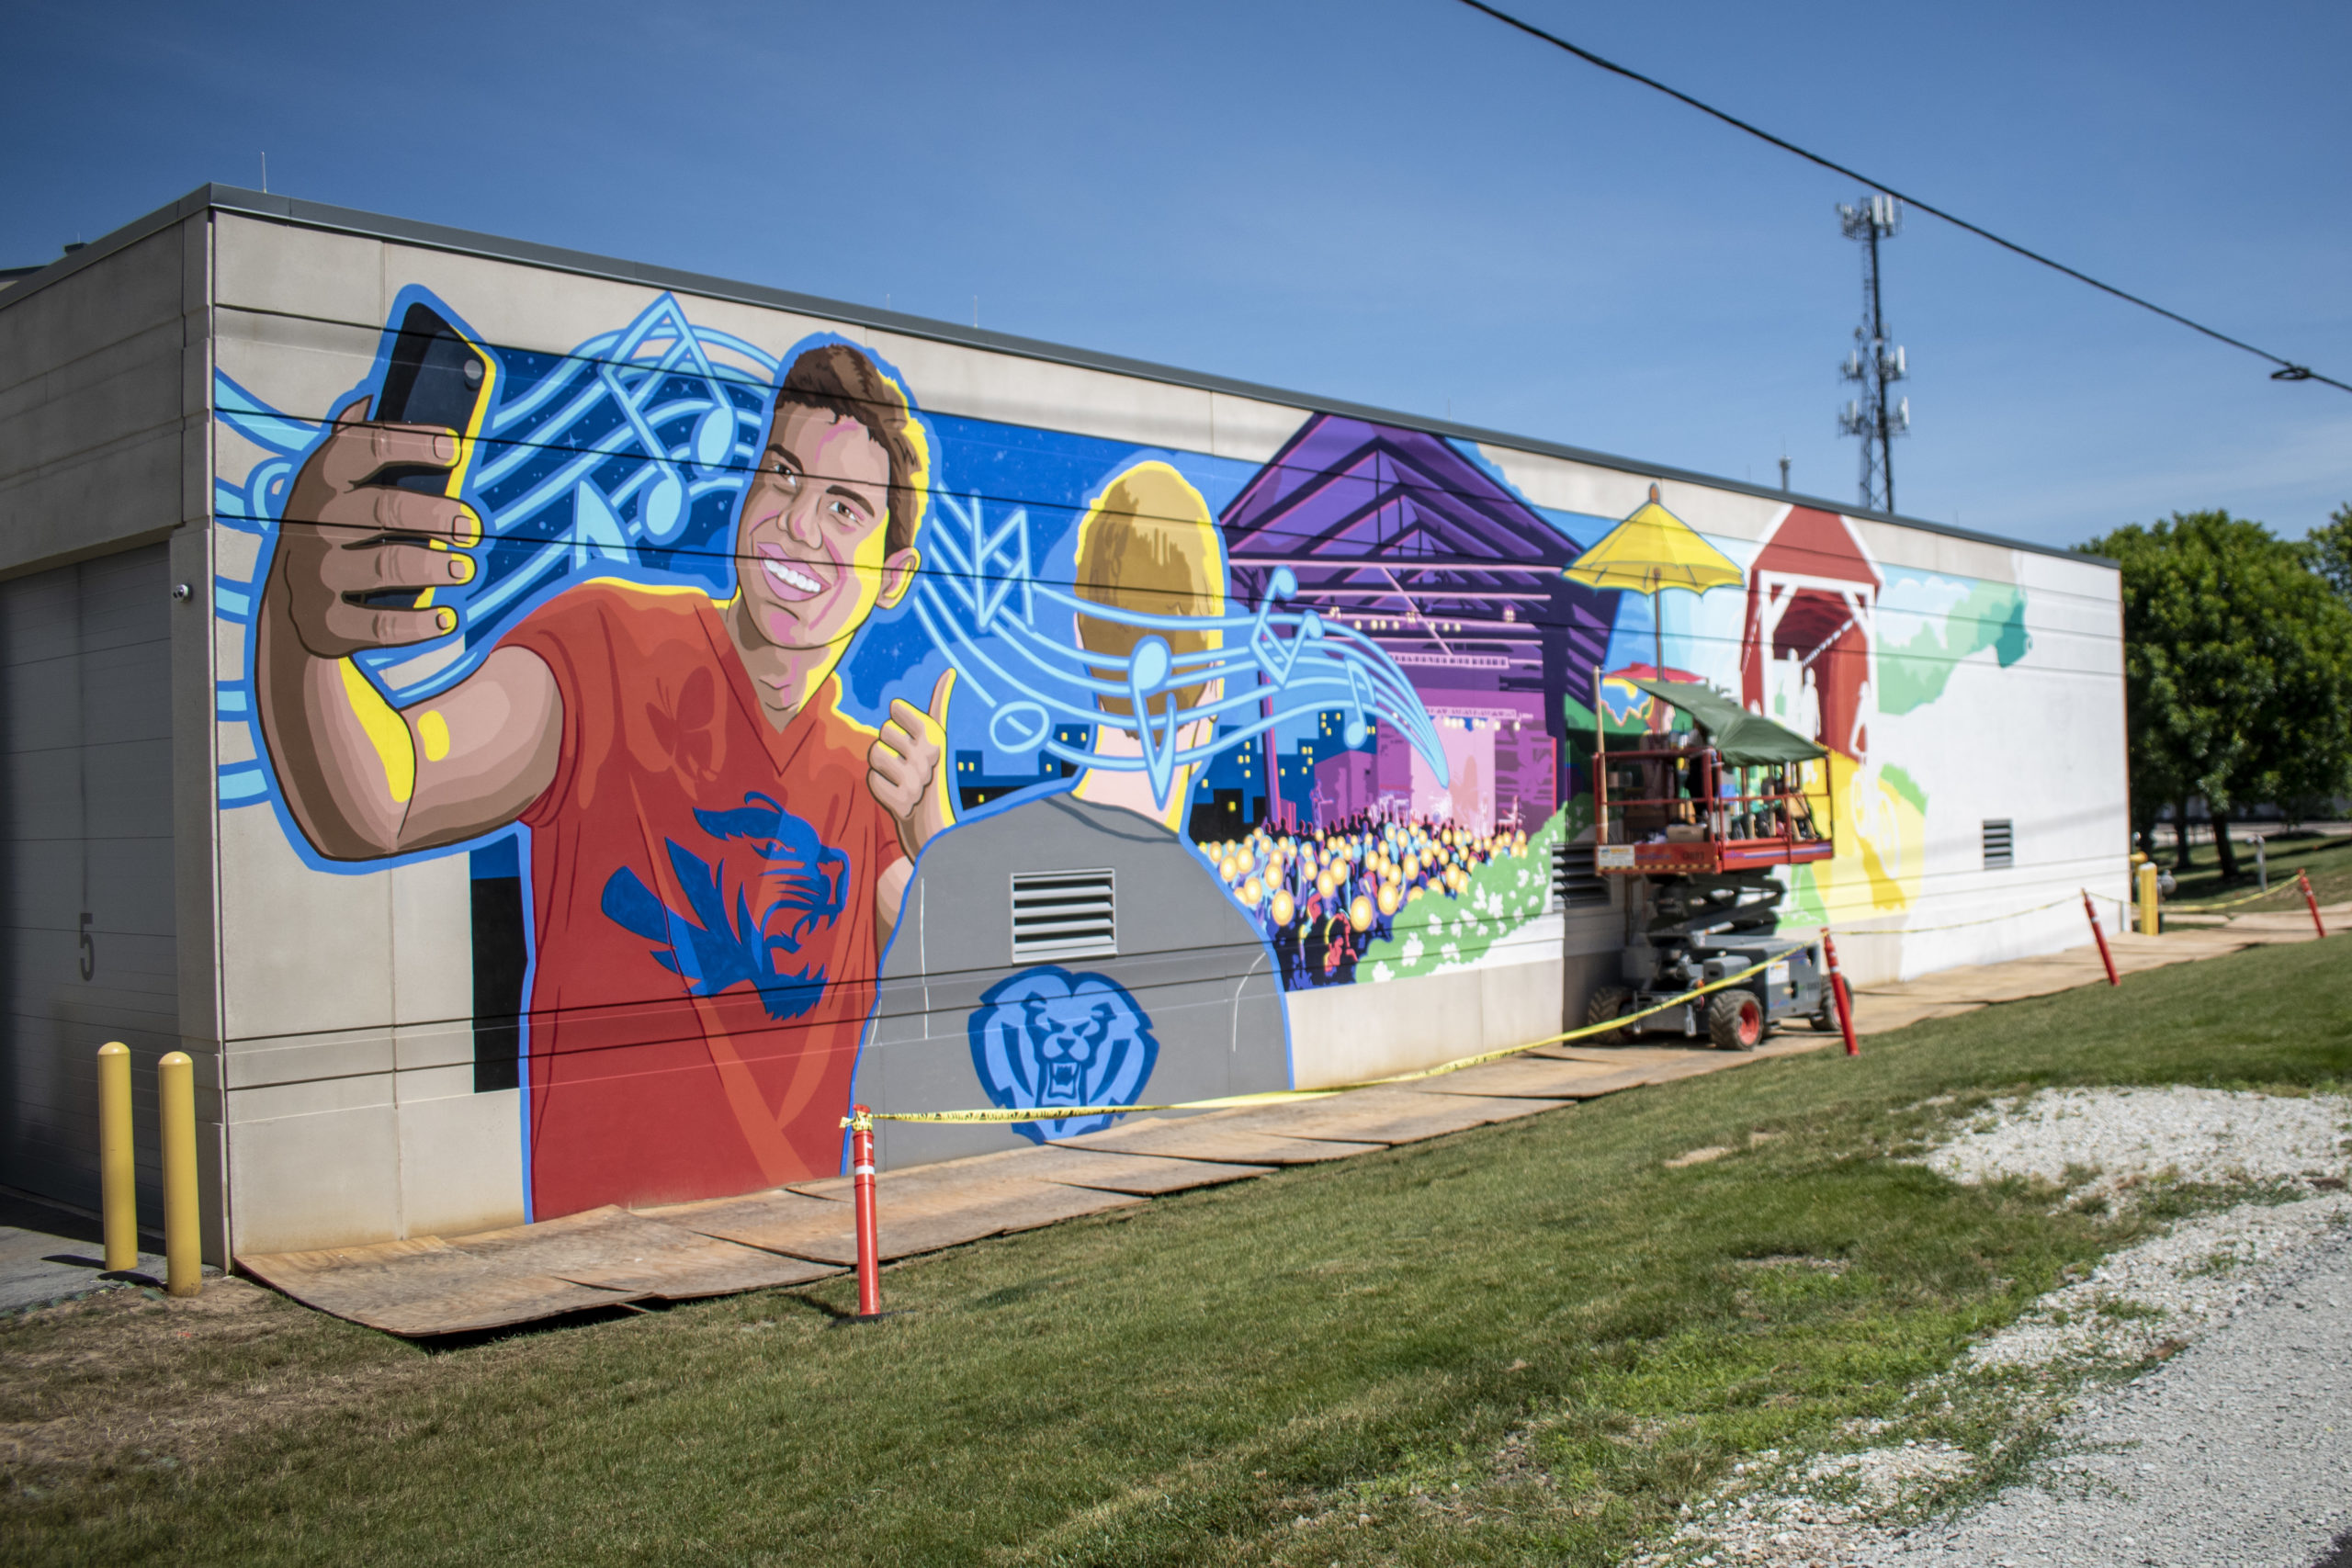 a mural of a person taking a selfie on their phone, a person with a school logo on their shirt, a concert venue with people and a covered bridge